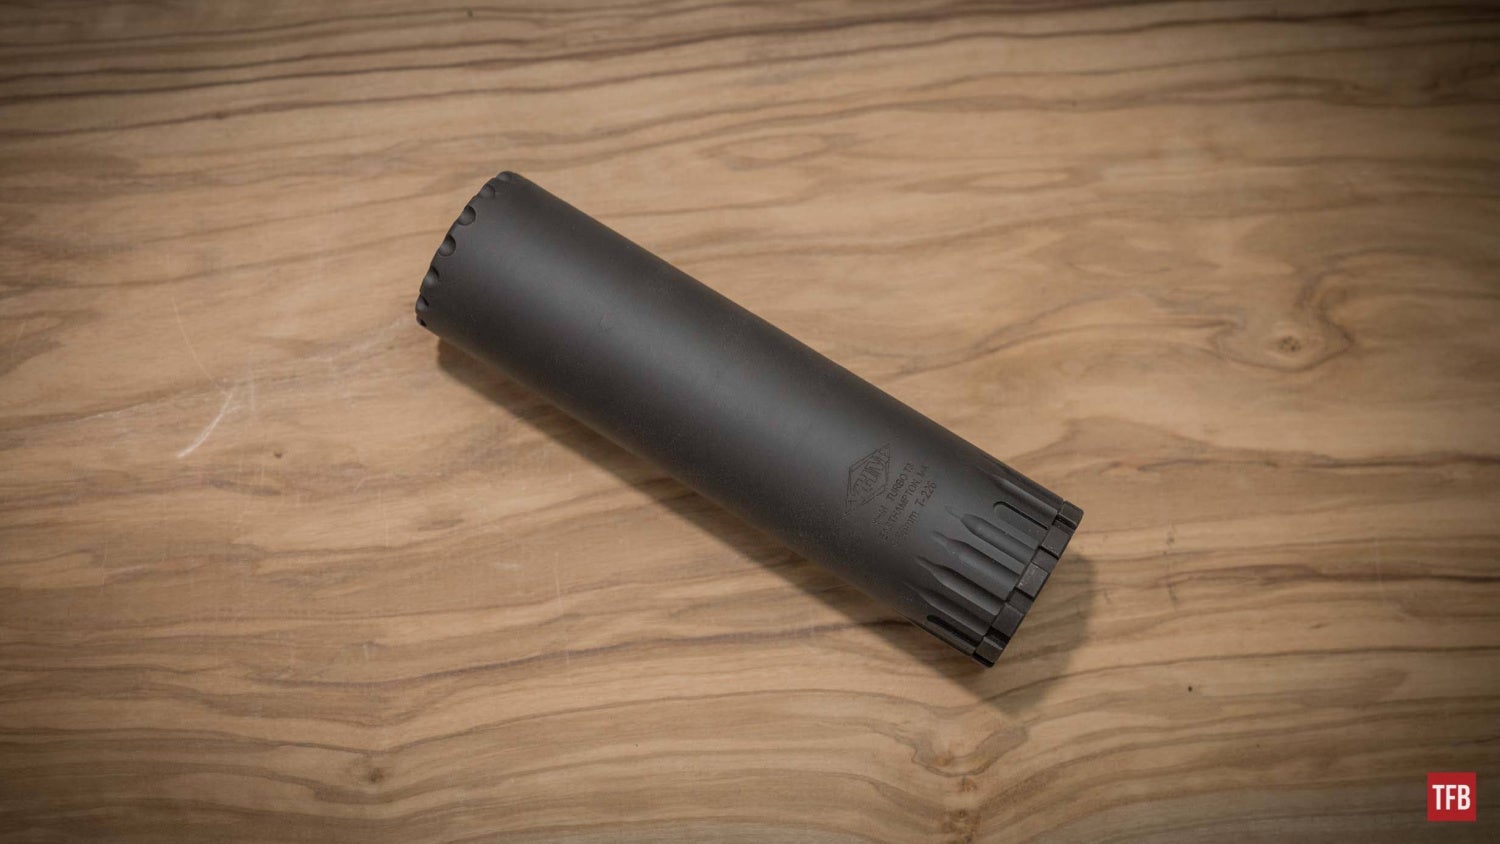 SILENCER SATURDAY #257: Limit TOXIC EXPOSURE - The New YHM Turbo T3 Suppressor